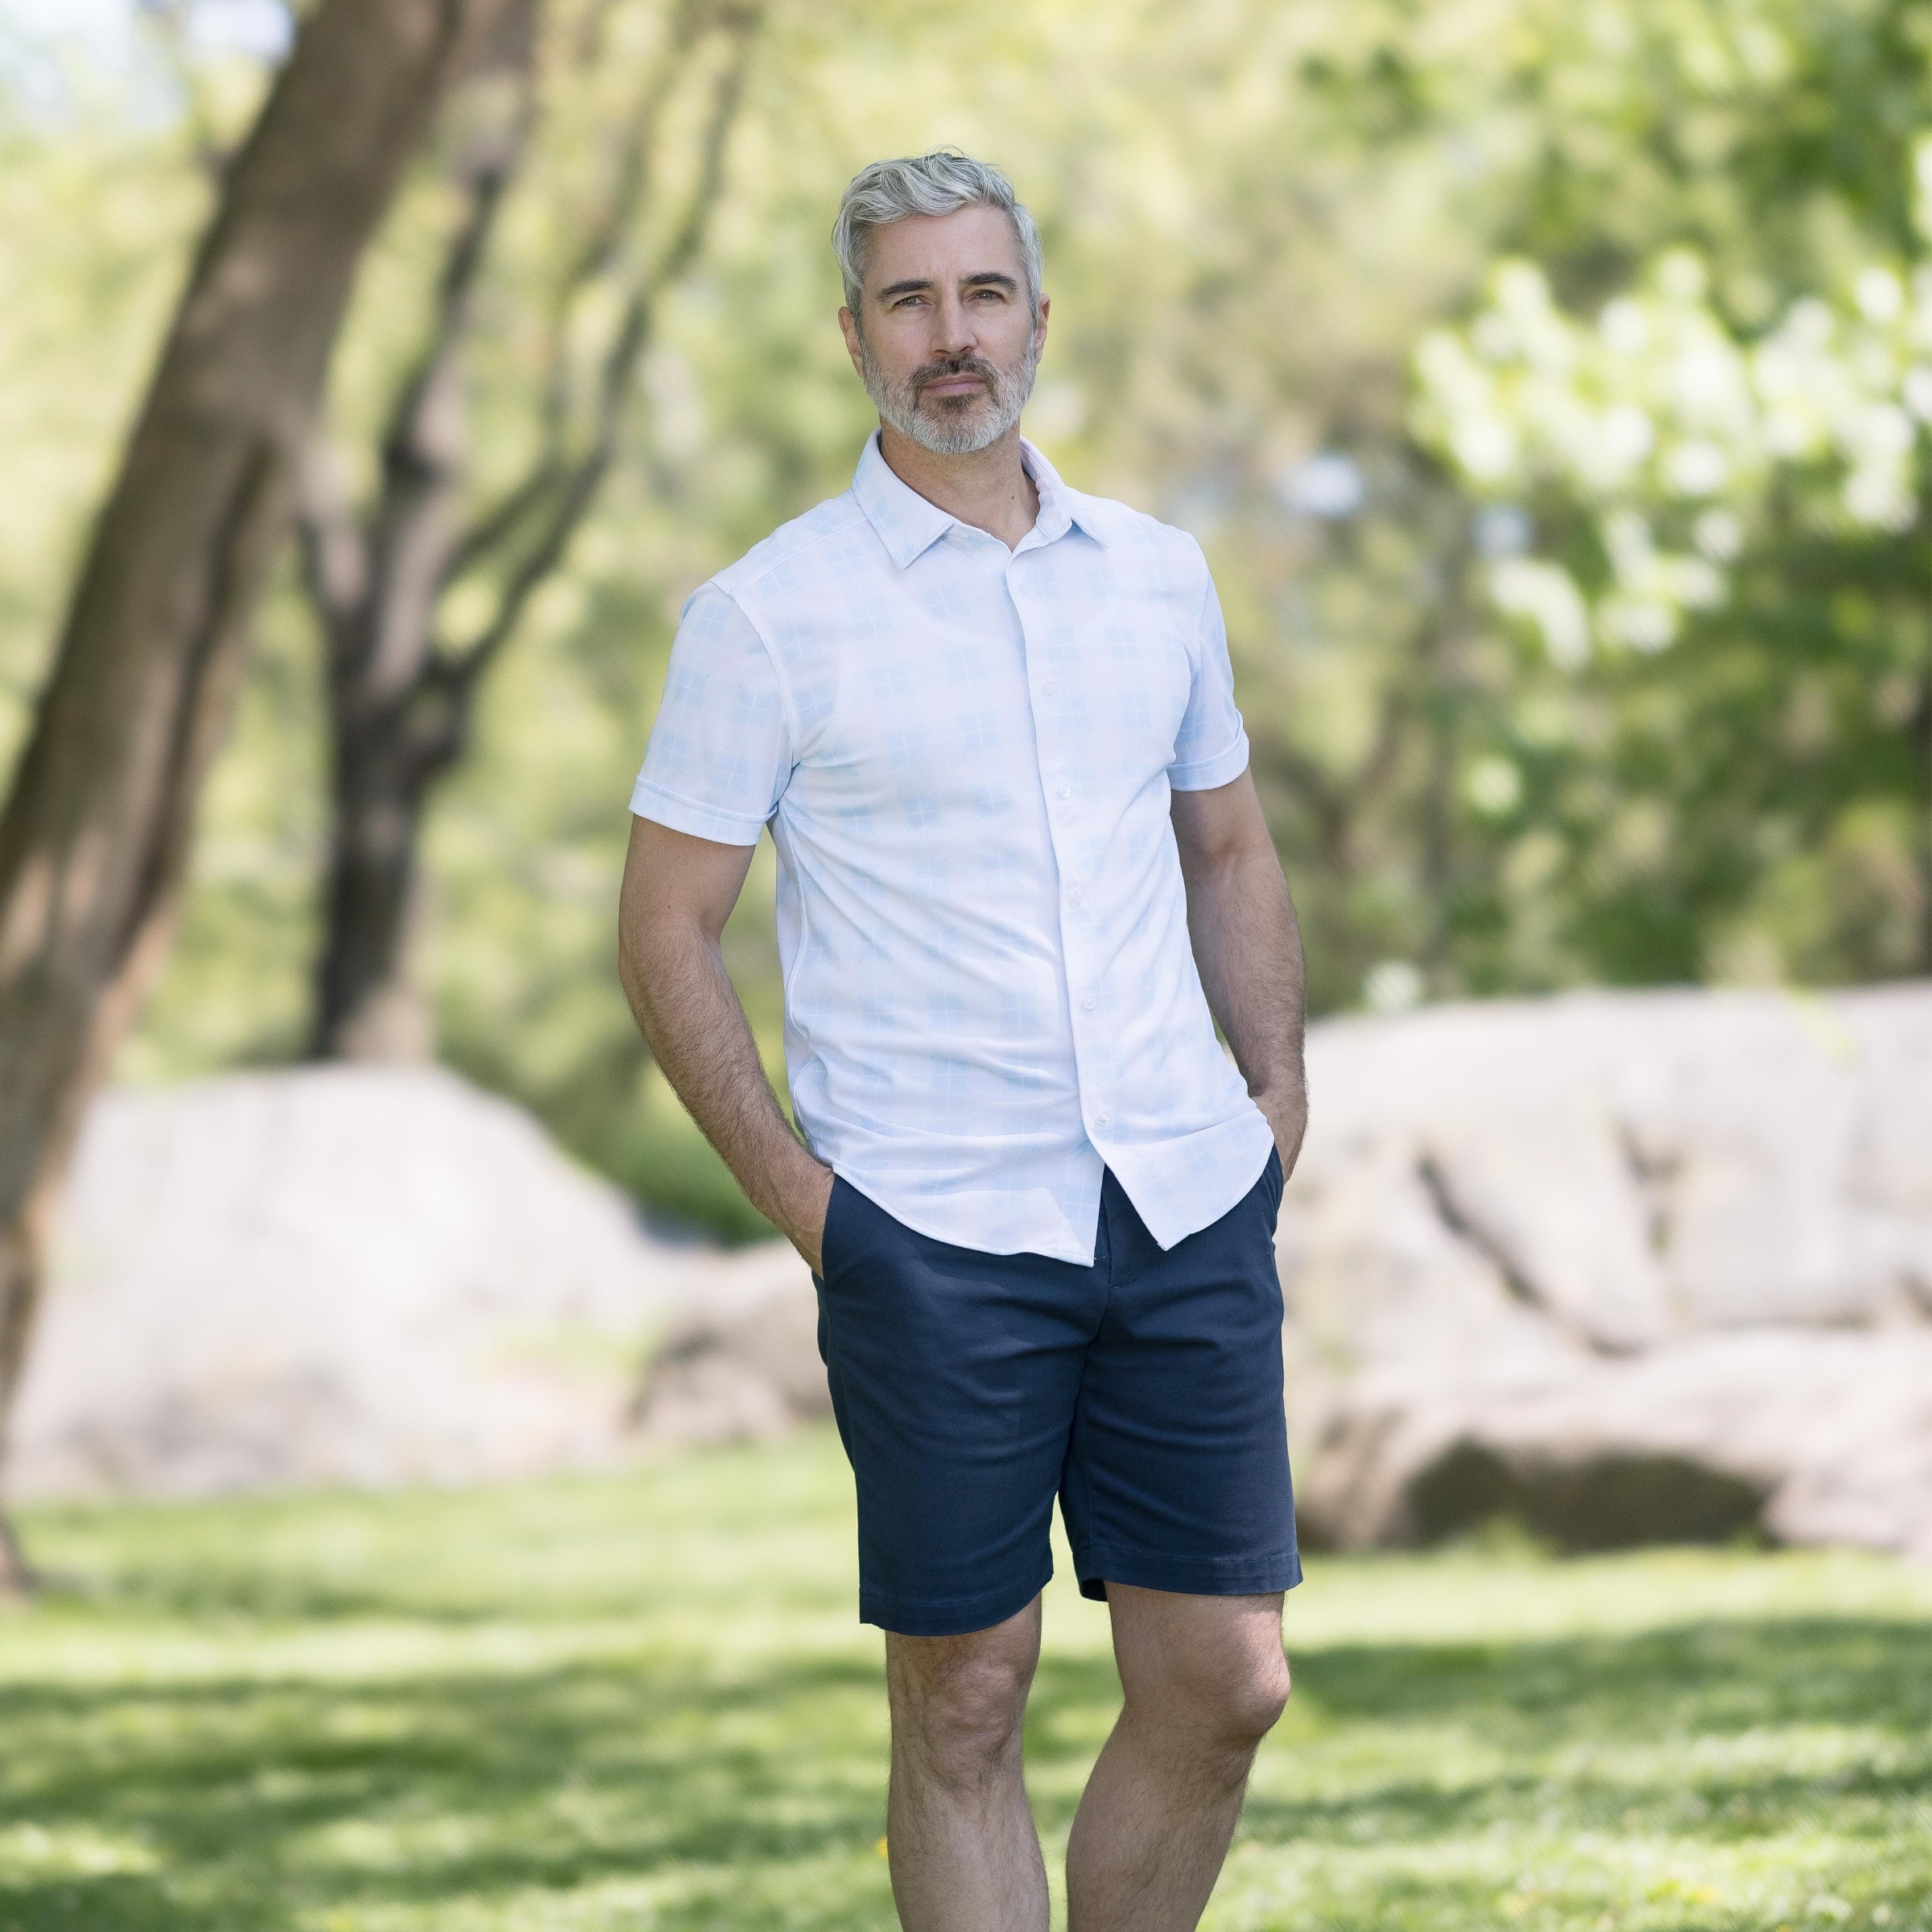 MagnaReady x Arctic Cooling Pique Polo Short Sleeves in Sky Gingham